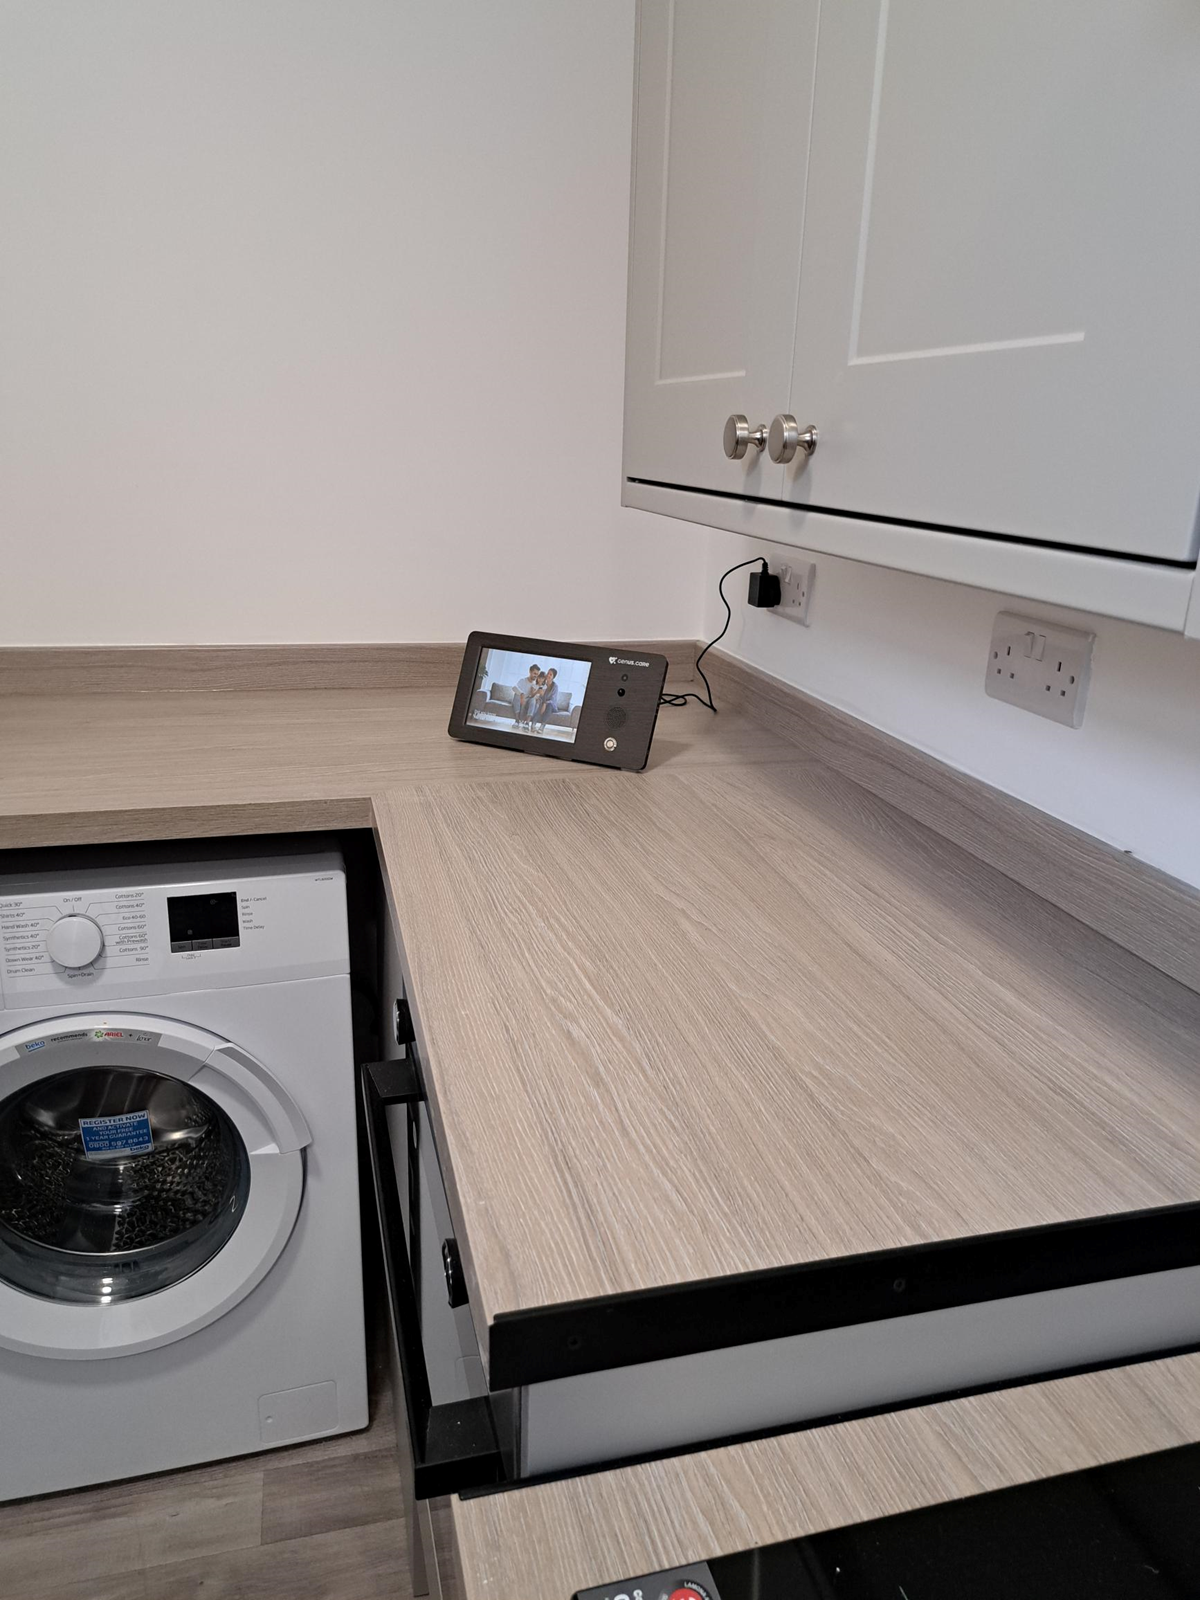 A 'Genus Care' device in the kitchen at one of the Slyne Road supported living apartments.